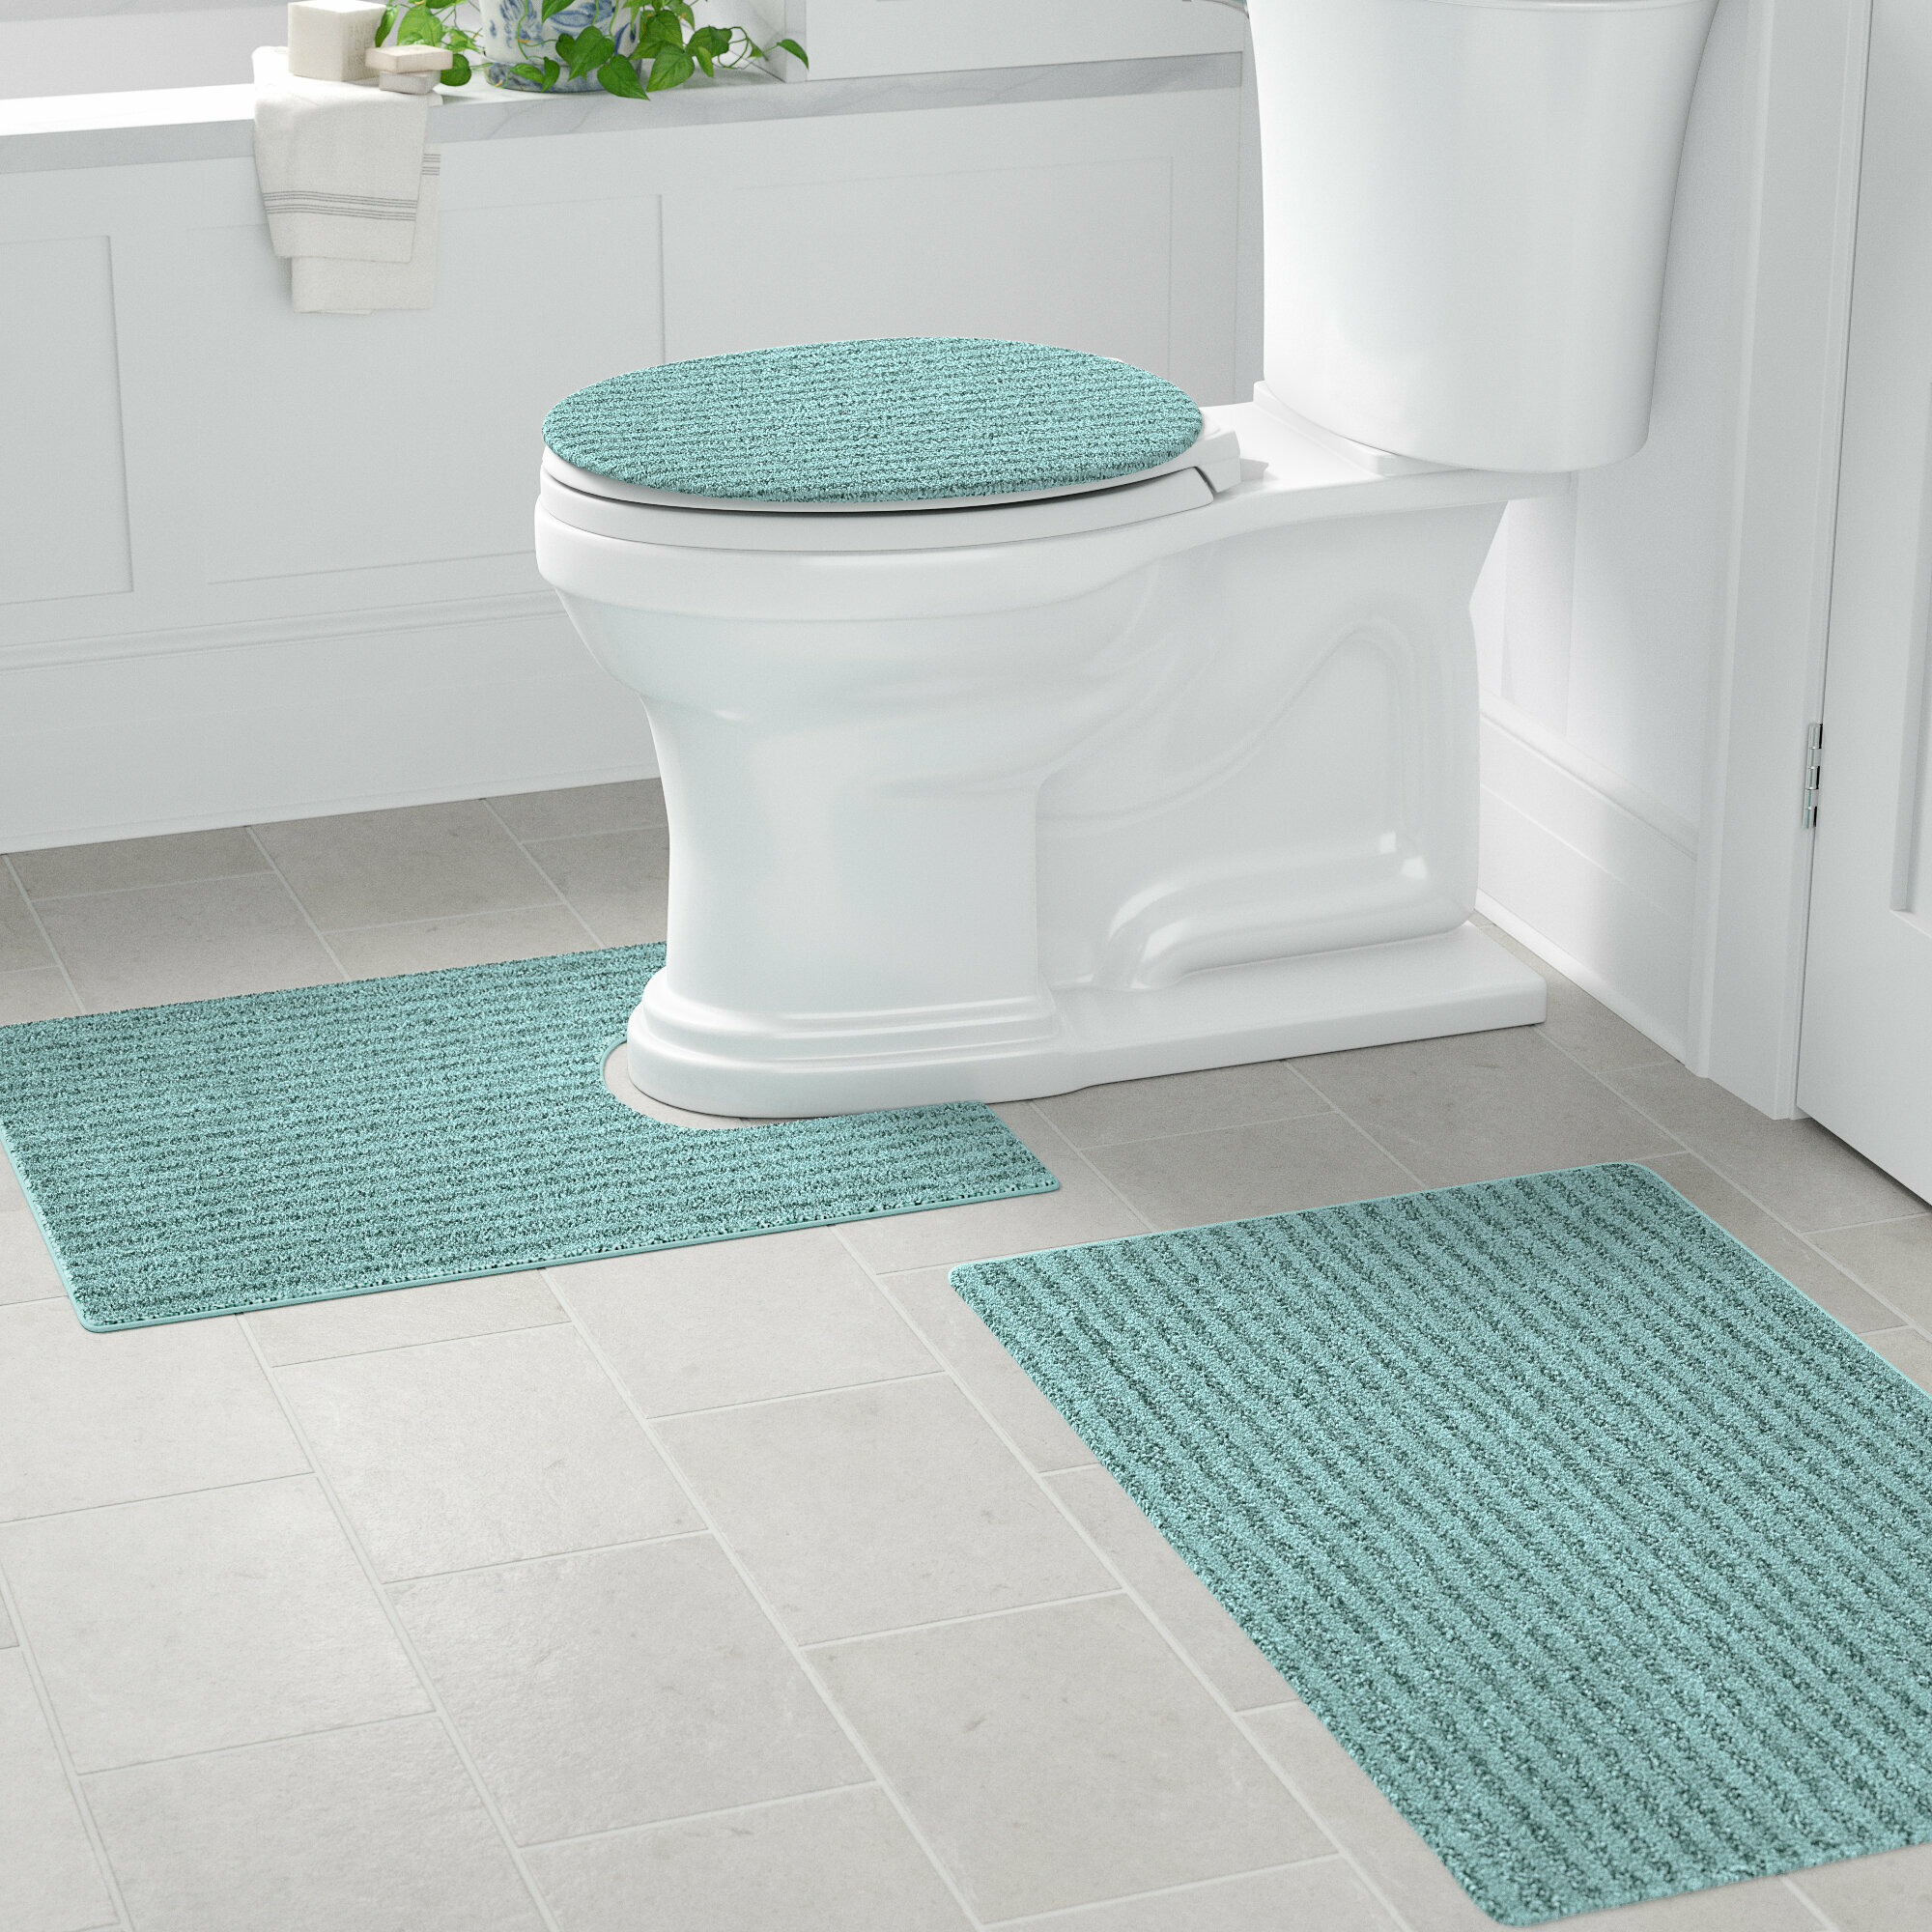 How to choose bathroom rug sets that will look perfect for your